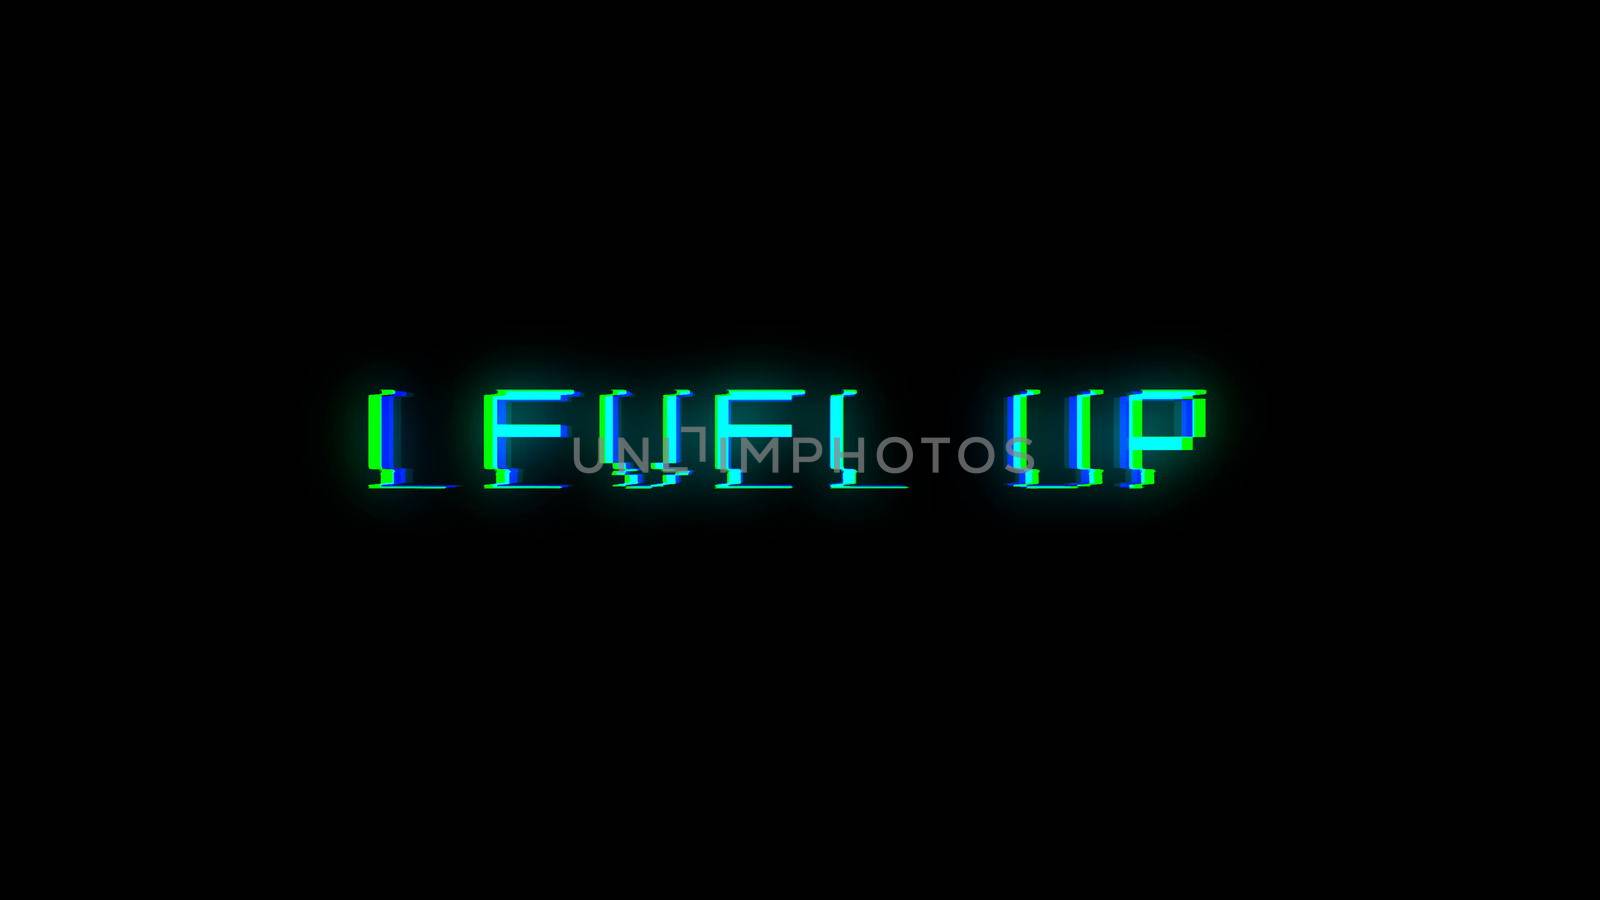 Level UP text with bad signal. Glitch effect by nolimit046